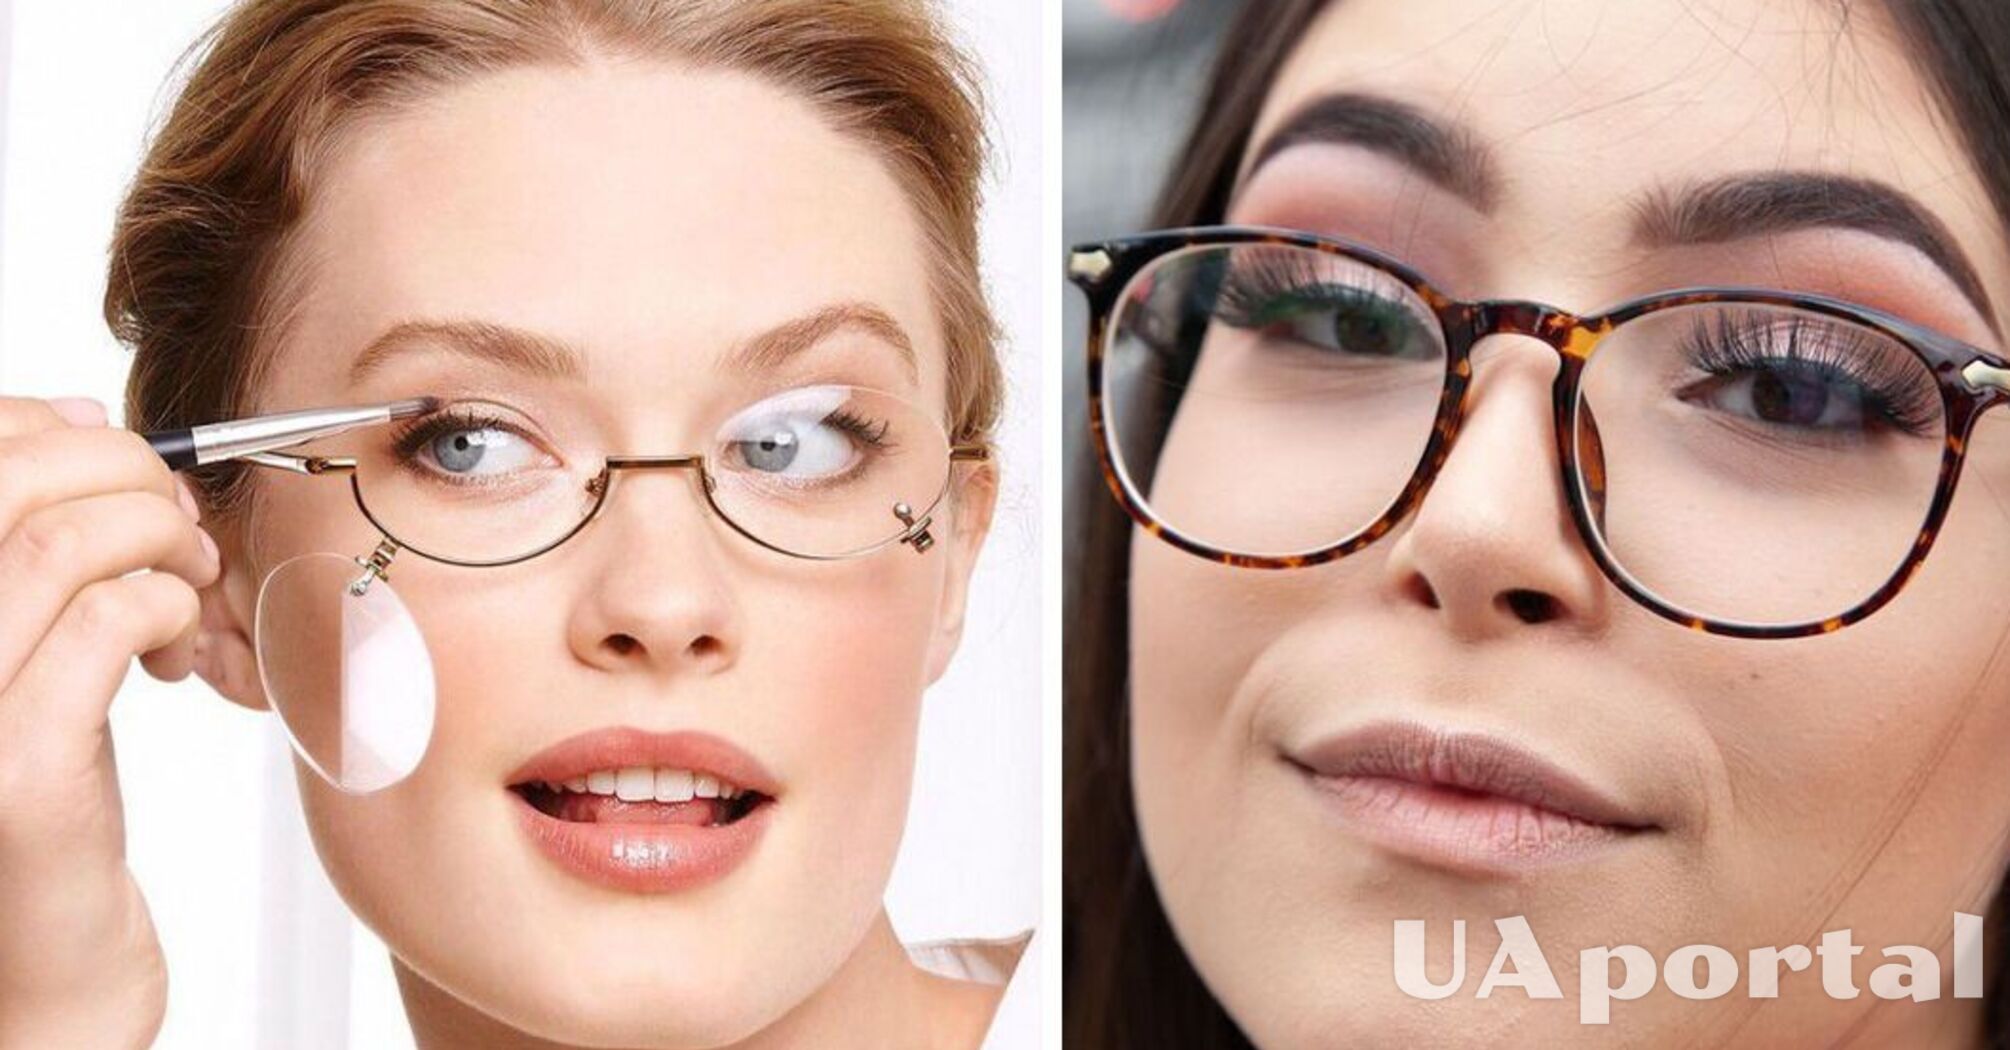 What kind of makeup should women who wear glasses wear: rules to know